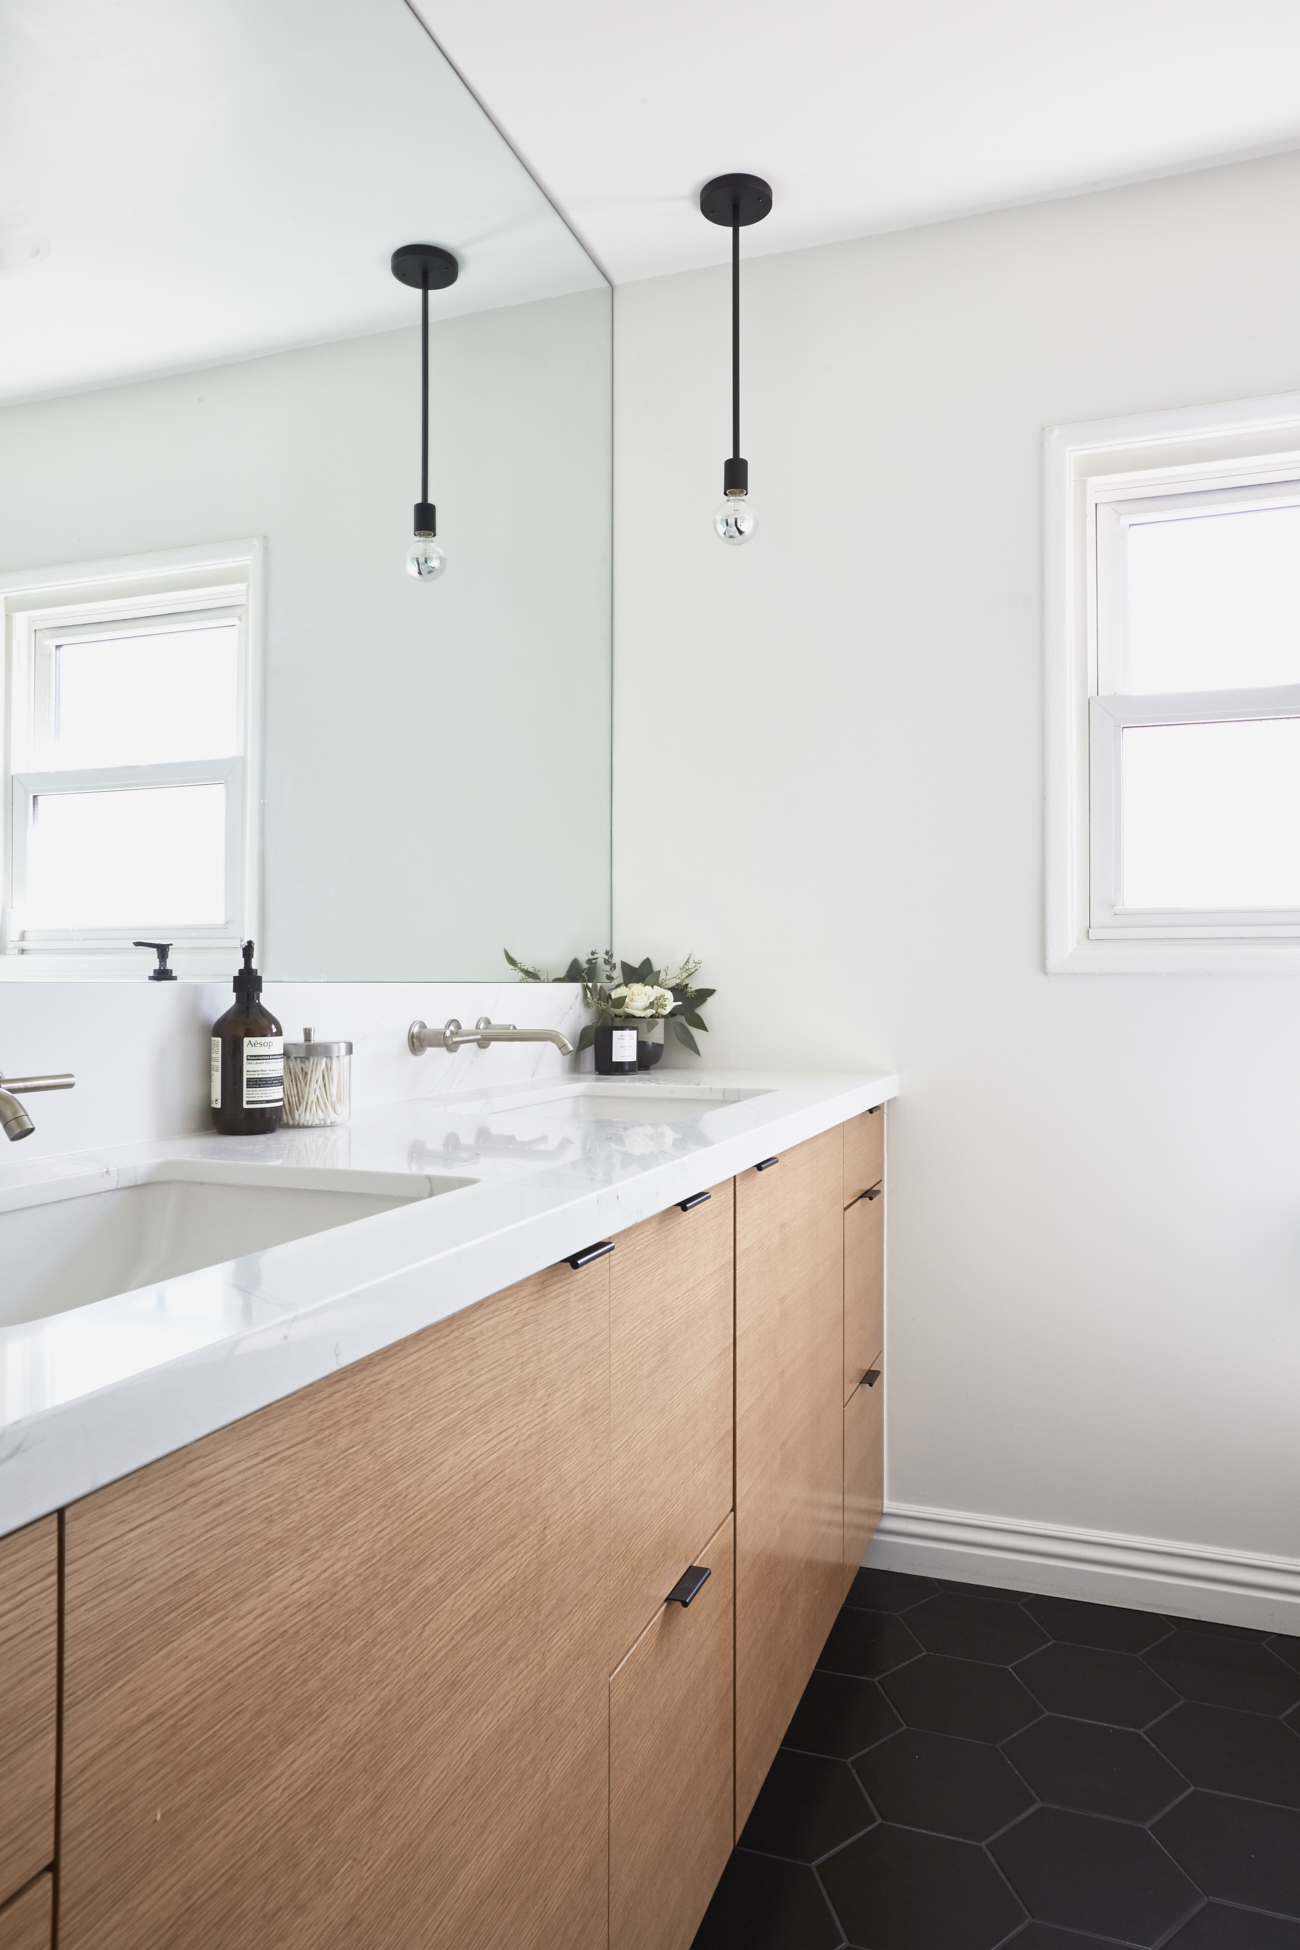 Final Bathroom Reveal / See and Savour